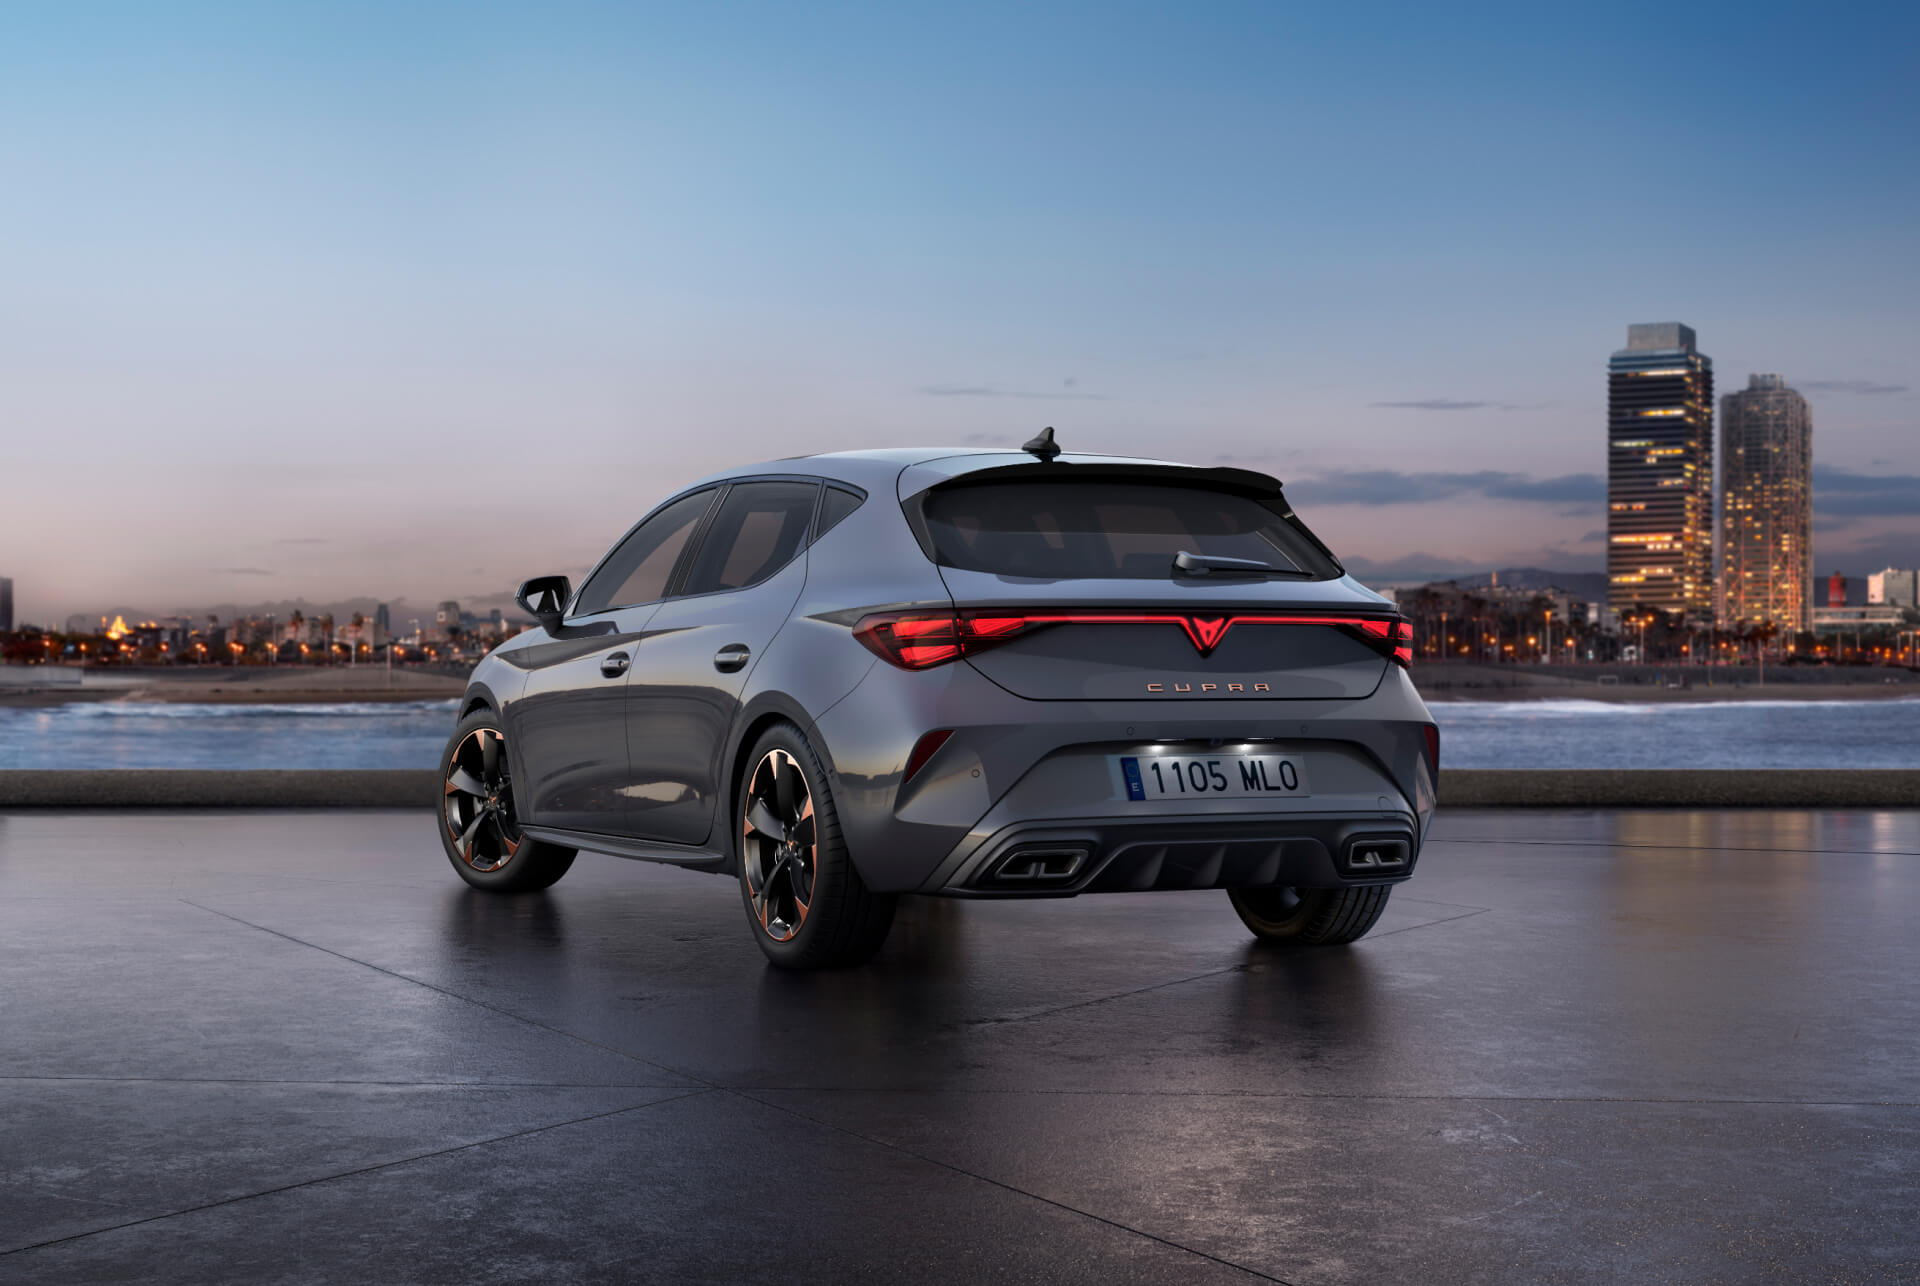 Rear view shot of new cupra leon 2024 glossy grey car model with dynamic chassis control, plus black and copper alloy wheels. City in the background at sunset.